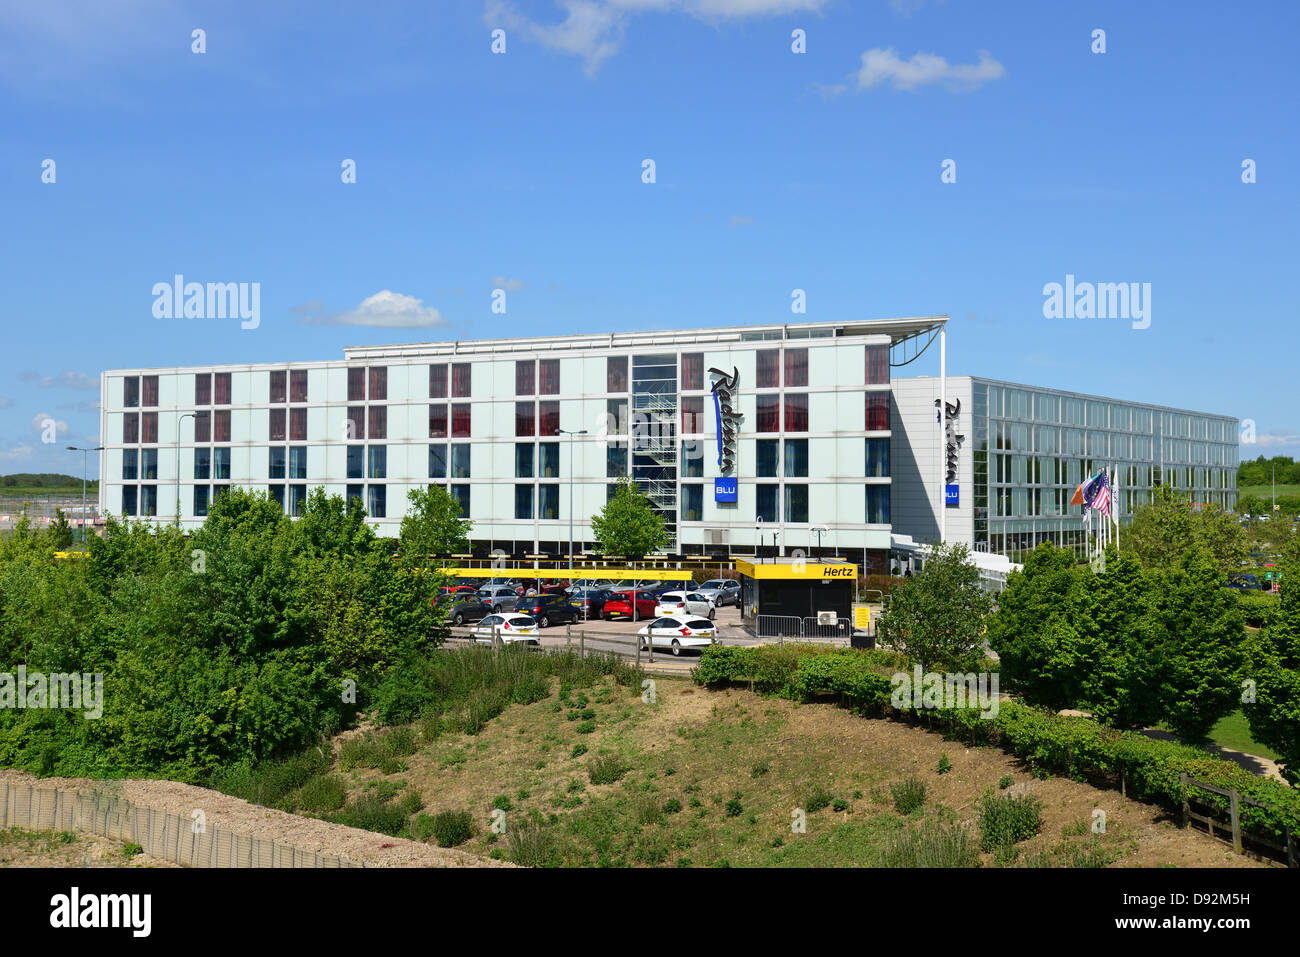 Radisson Blu Hotel at Stansted Airport, Stansted Mountfitchet, Essex, England, United Kingdom Stock Photo